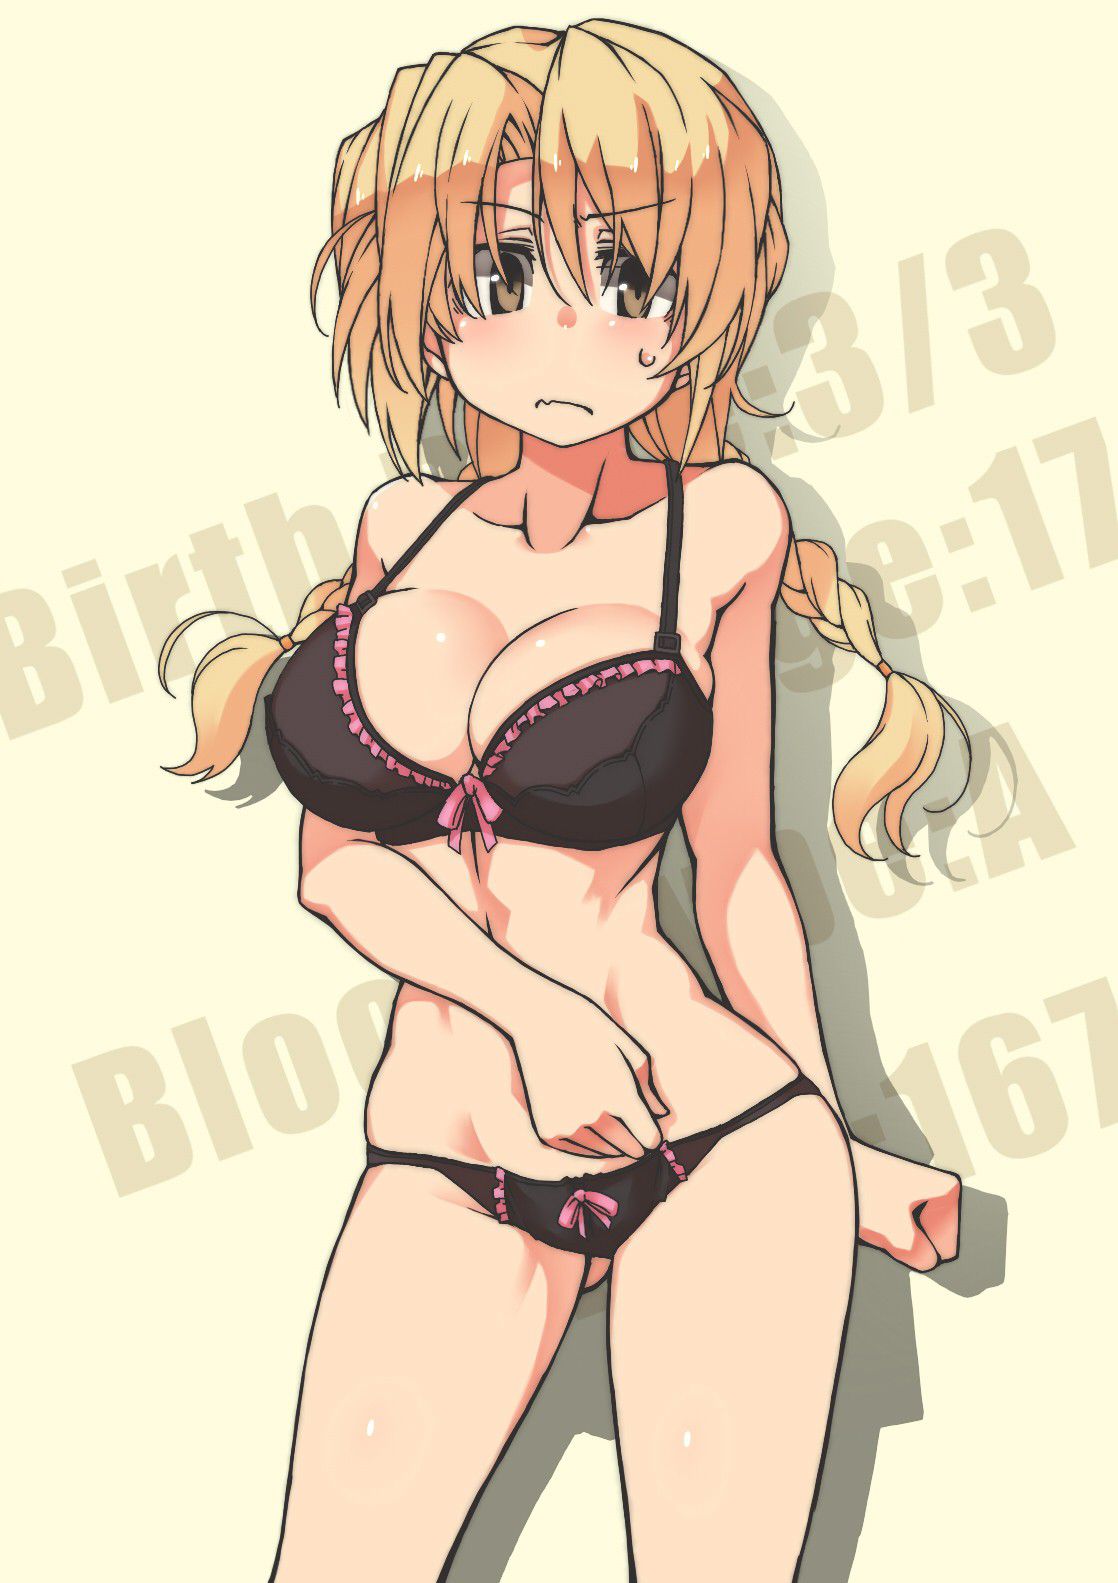 Secondary erotic image of a girl wearing black underwear that looks sexier than [secondary] that 20 [black underwear] 17